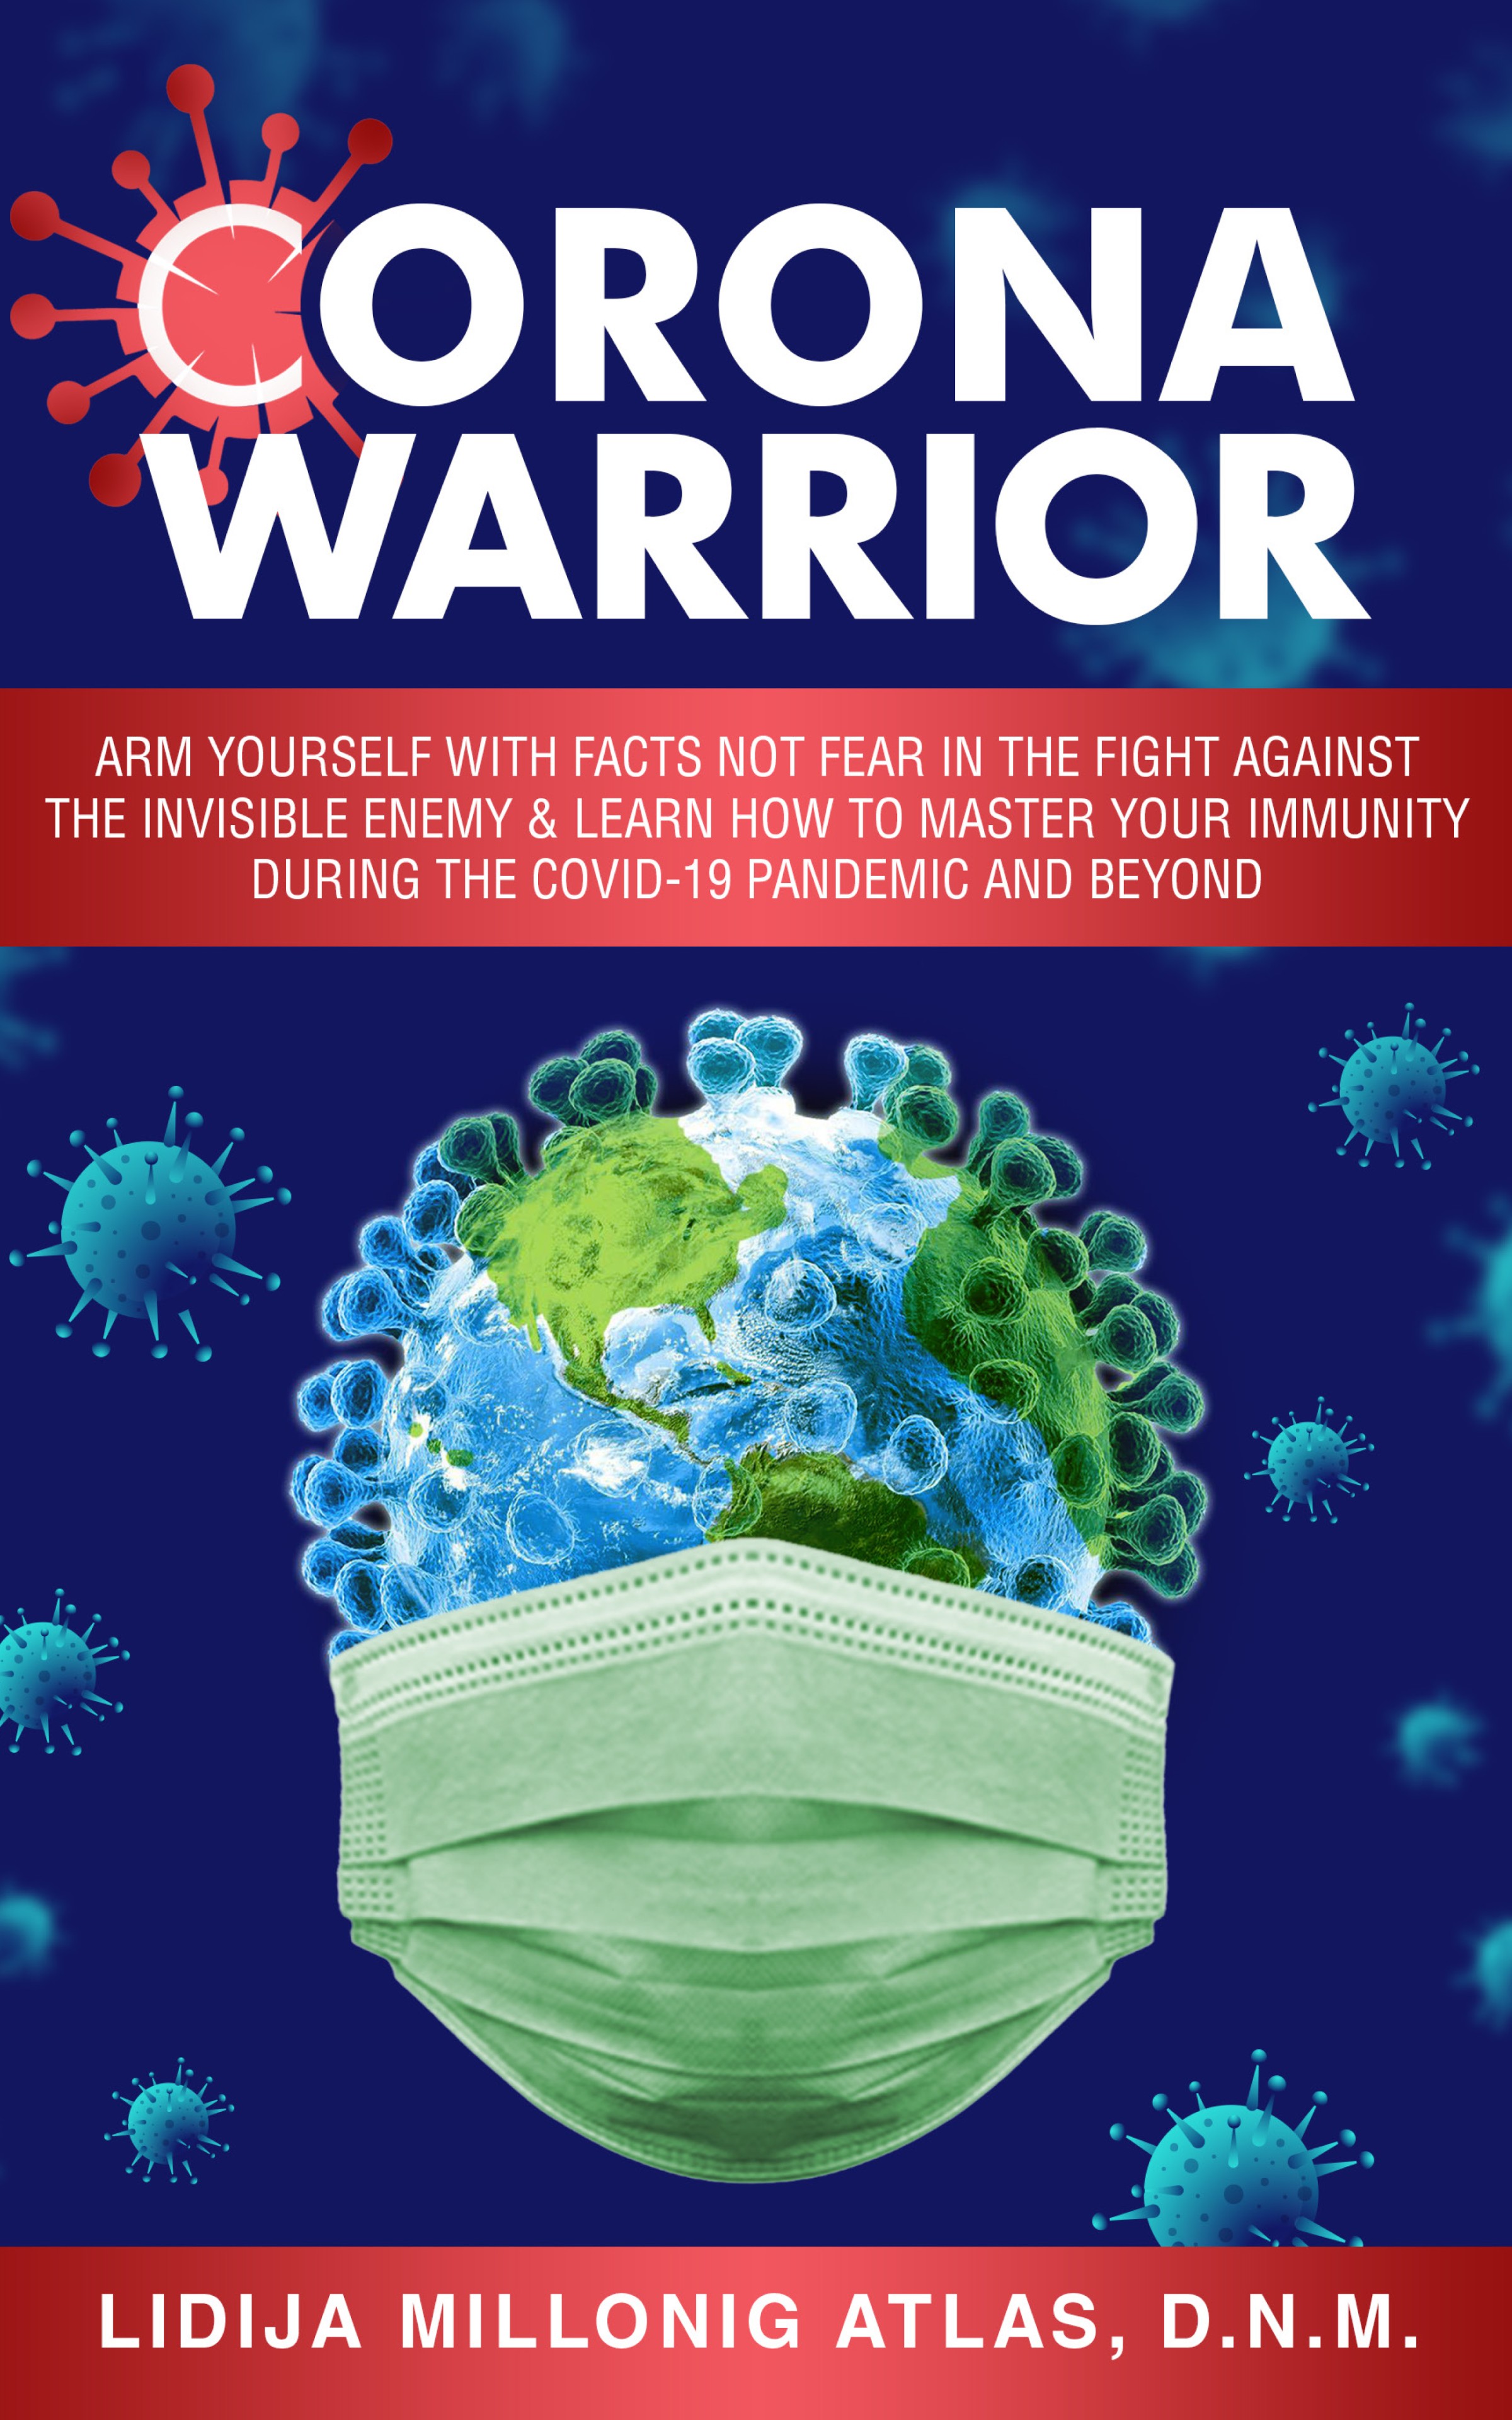 Book On Improving Immune Resistance To Covid 19 Banned On Amazon Newswire